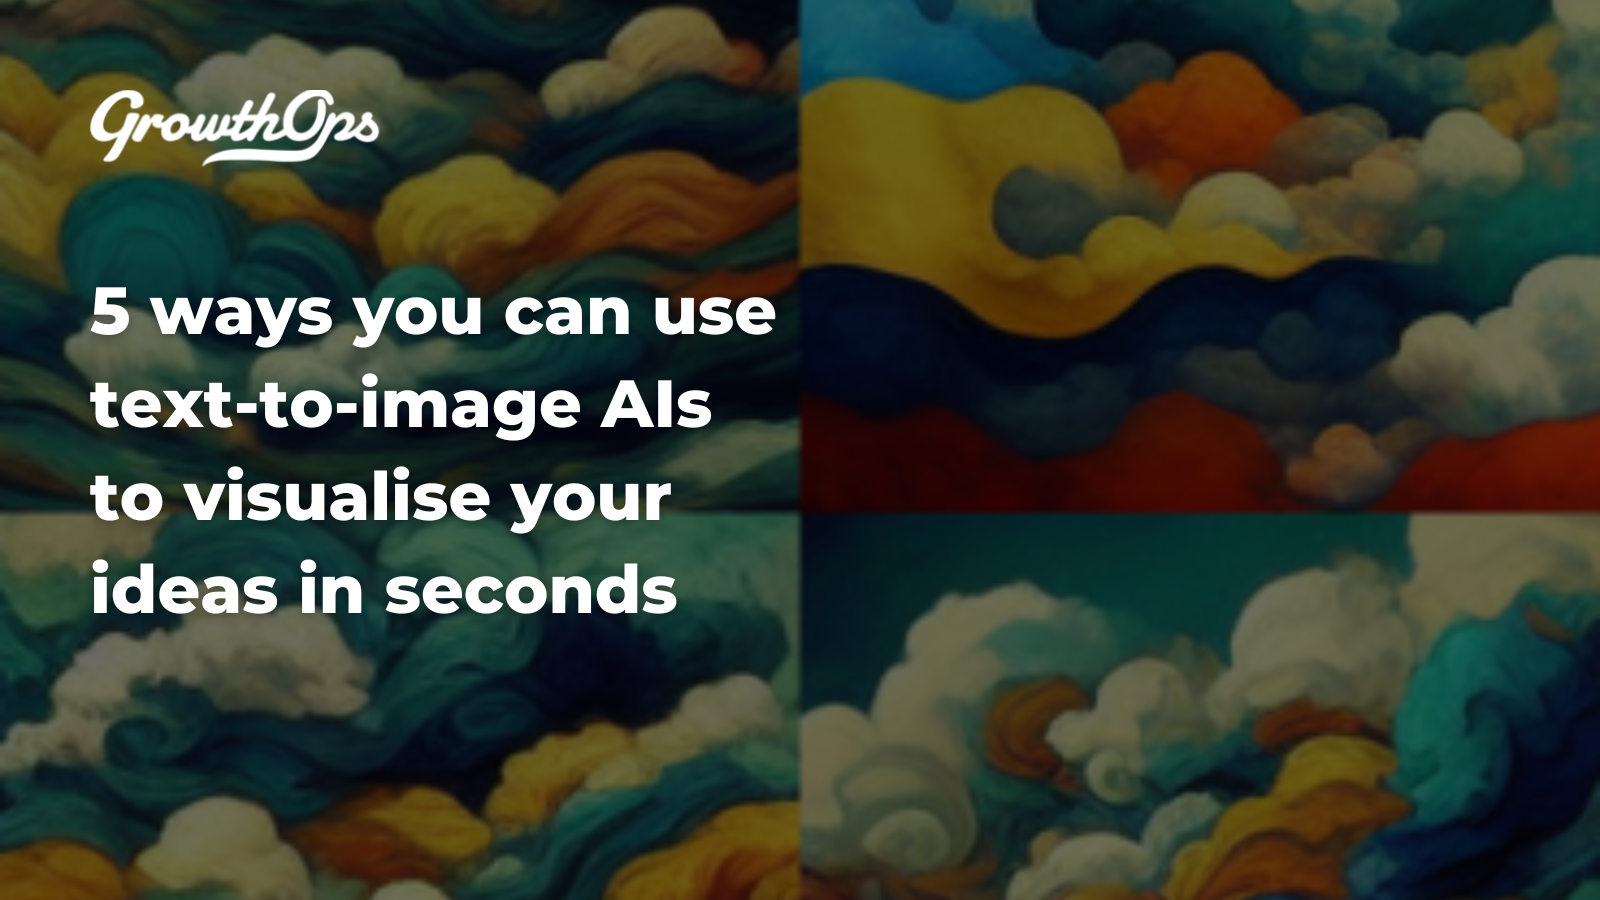 5 ways you can use text-to-image AIs to visualise your ideas in seconds